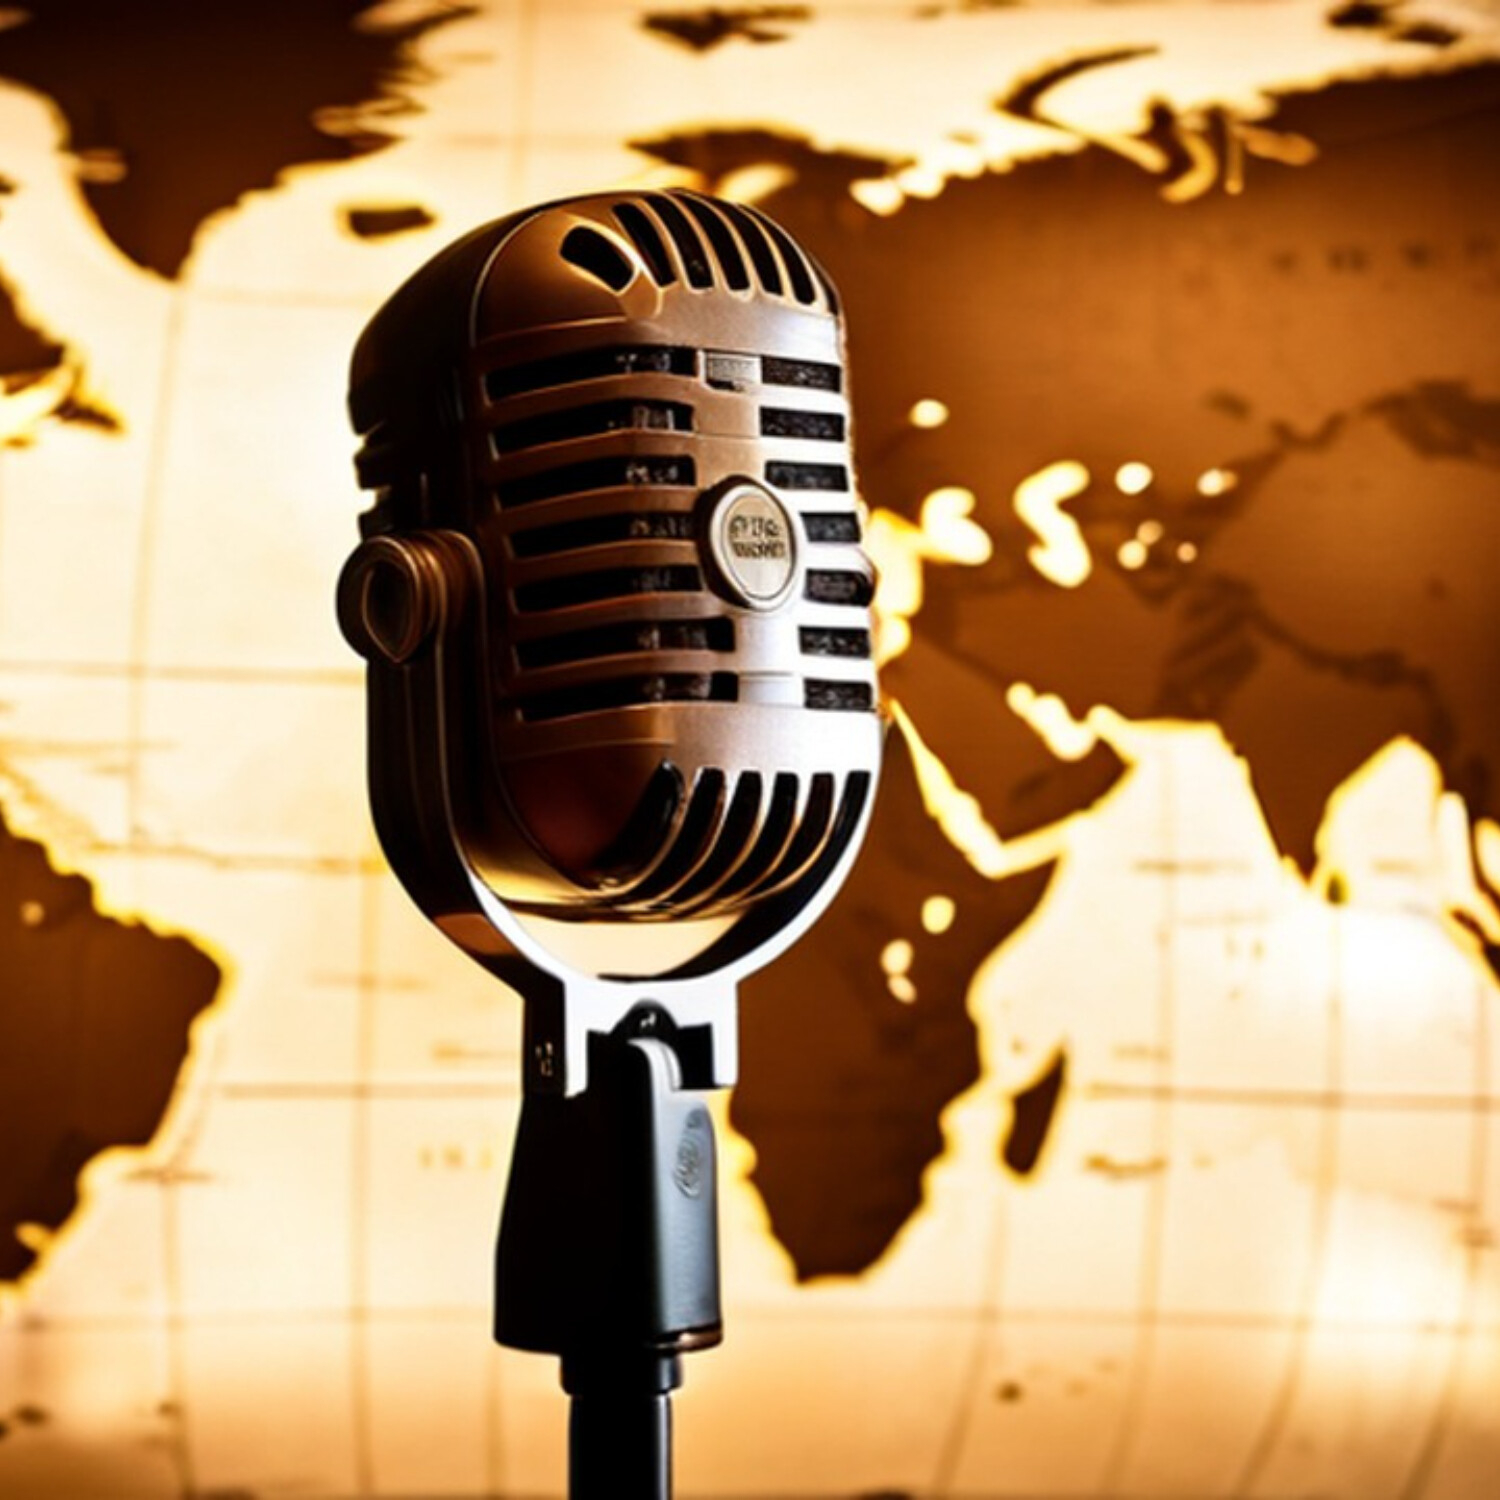 Let your Podcast Take Flight with THE EMBC NETWORK The Global Reach of Podcasting